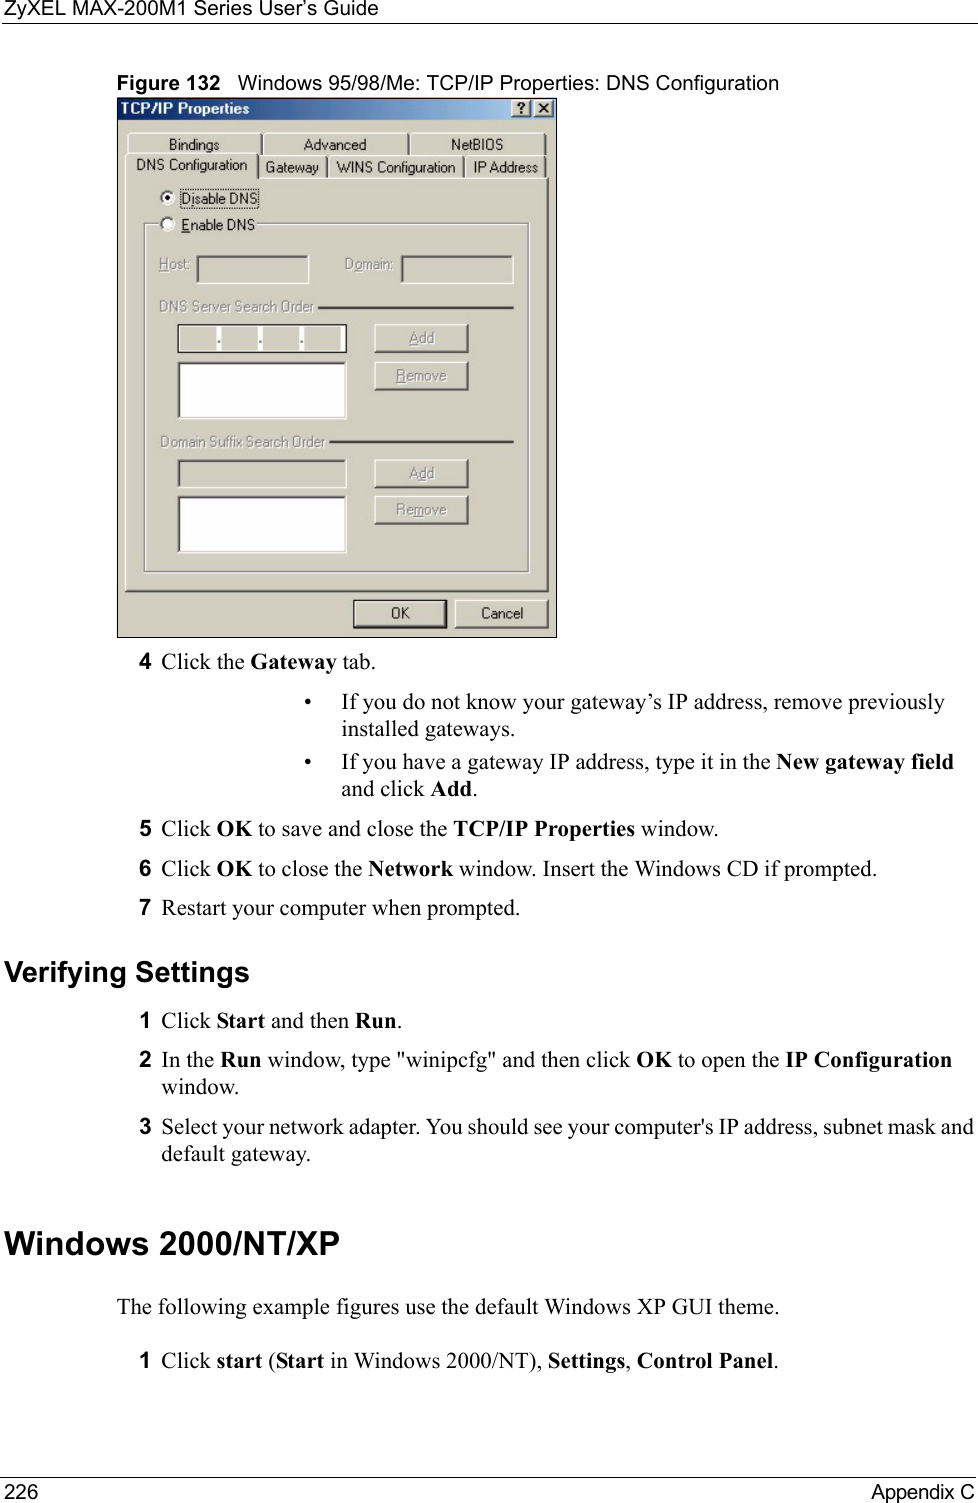 ZyXEL MAX-200M1 Series User’s Guide226 Appendix CFigure 132   Windows 95/98/Me: TCP/IP Properties: DNS Configuration4Click the Gateway tab.• If you do not know your gateway’s IP address, remove previously installed gateways.• If you have a gateway IP address, type it in the New gateway field and click Add.5Click OK to save and close the TCP/IP Properties window.6Click OK to close the Network window. Insert the Windows CD if prompted.7Restart your computer when prompted.Verifying Settings1Click Start and then Run.2In the Run window, type &quot;winipcfg&quot; and then click OK to open the IP Configuration window.3Select your network adapter. You should see your computer&apos;s IP address, subnet mask and default gateway.Windows 2000/NT/XPThe following example figures use the default Windows XP GUI theme.1Click start (Start in Windows 2000/NT), Settings, Control Panel.